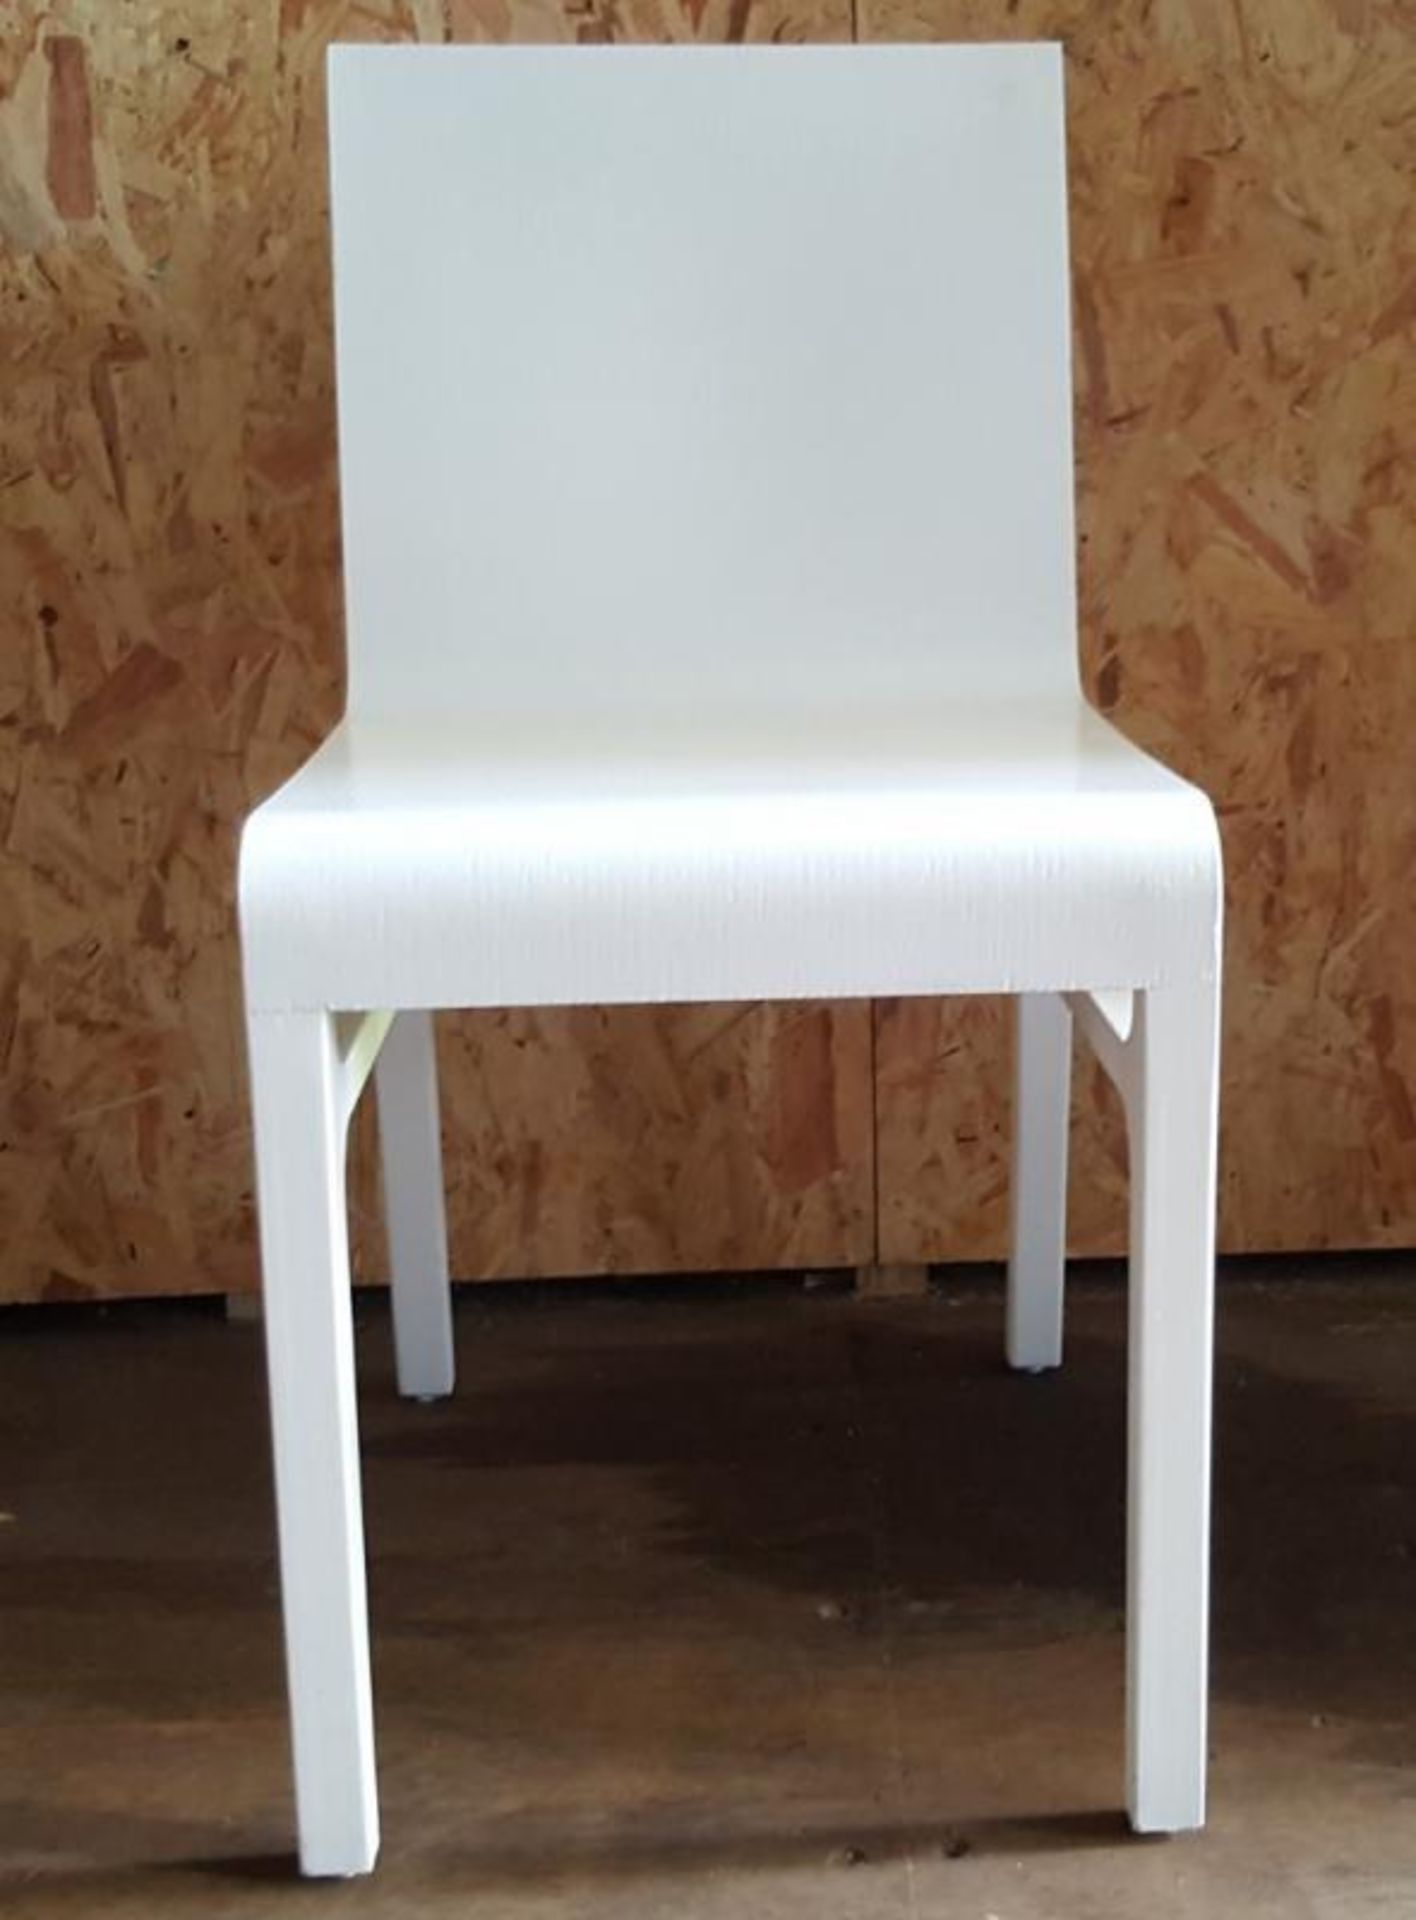 6 x Wooden Dining Chairs Set With A Bright White Finish - Dimensions: Used, In Good Condition - Ref - Image 3 of 6